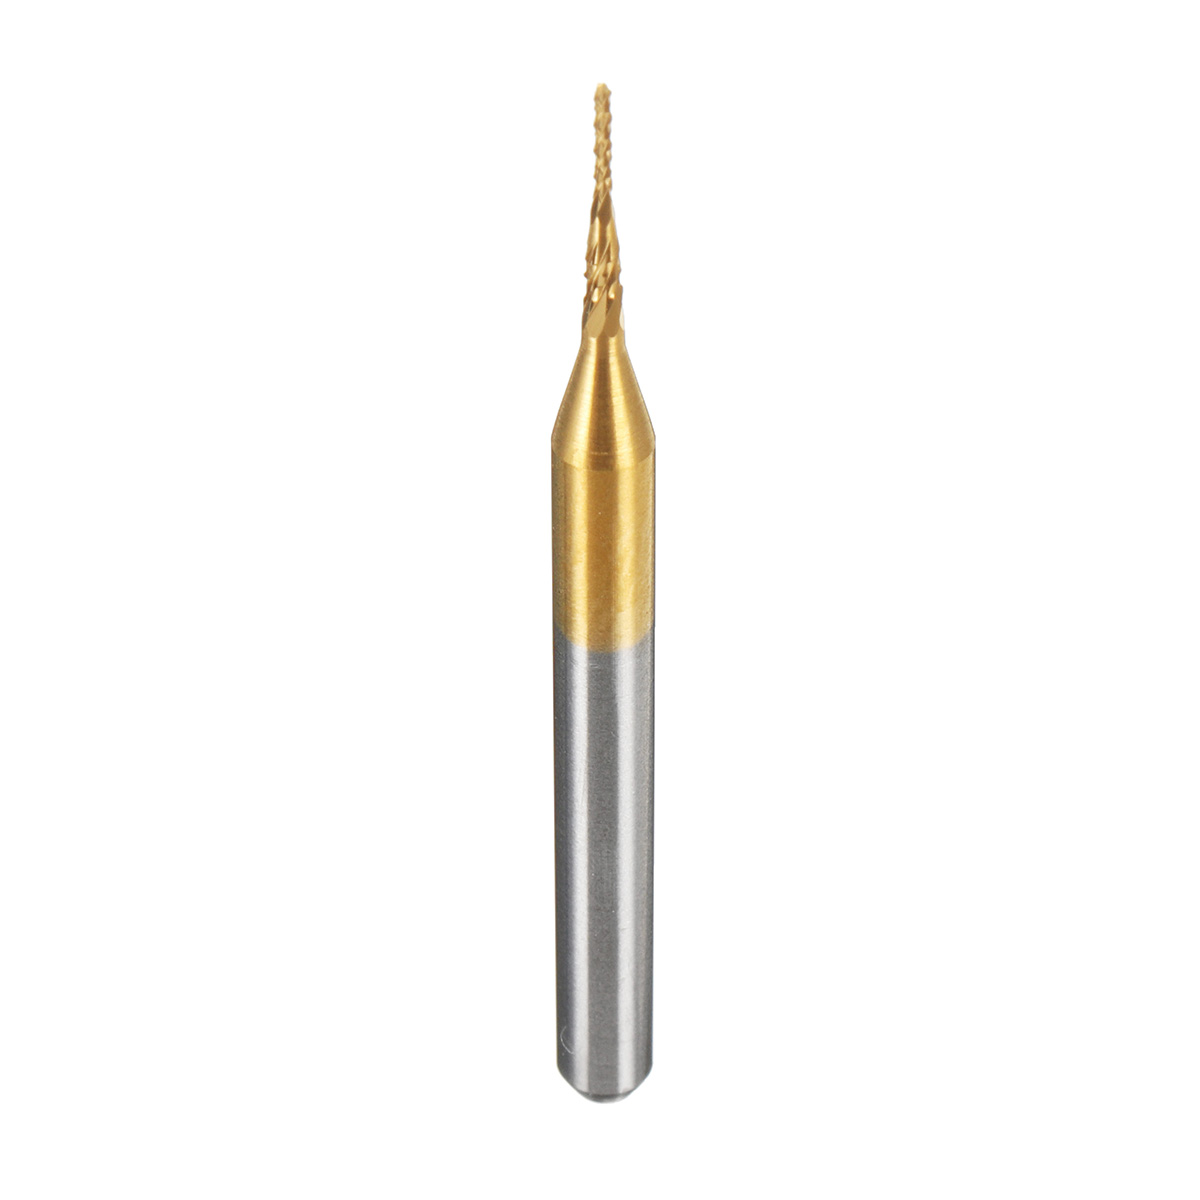 Drillpro-10pcs-07mm-Carbide-End-Mill-Cutter-Titanium-Coated-Engraving-Milling-Cutter-1532217-3